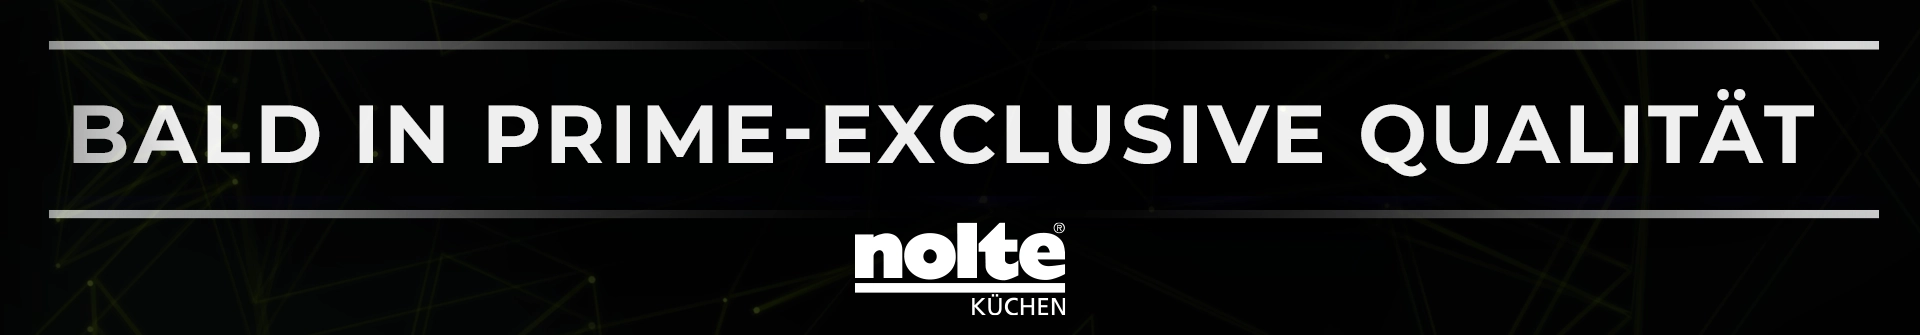 Soon in PRIME Exclusive Quality: Nolte and Nolte Neo